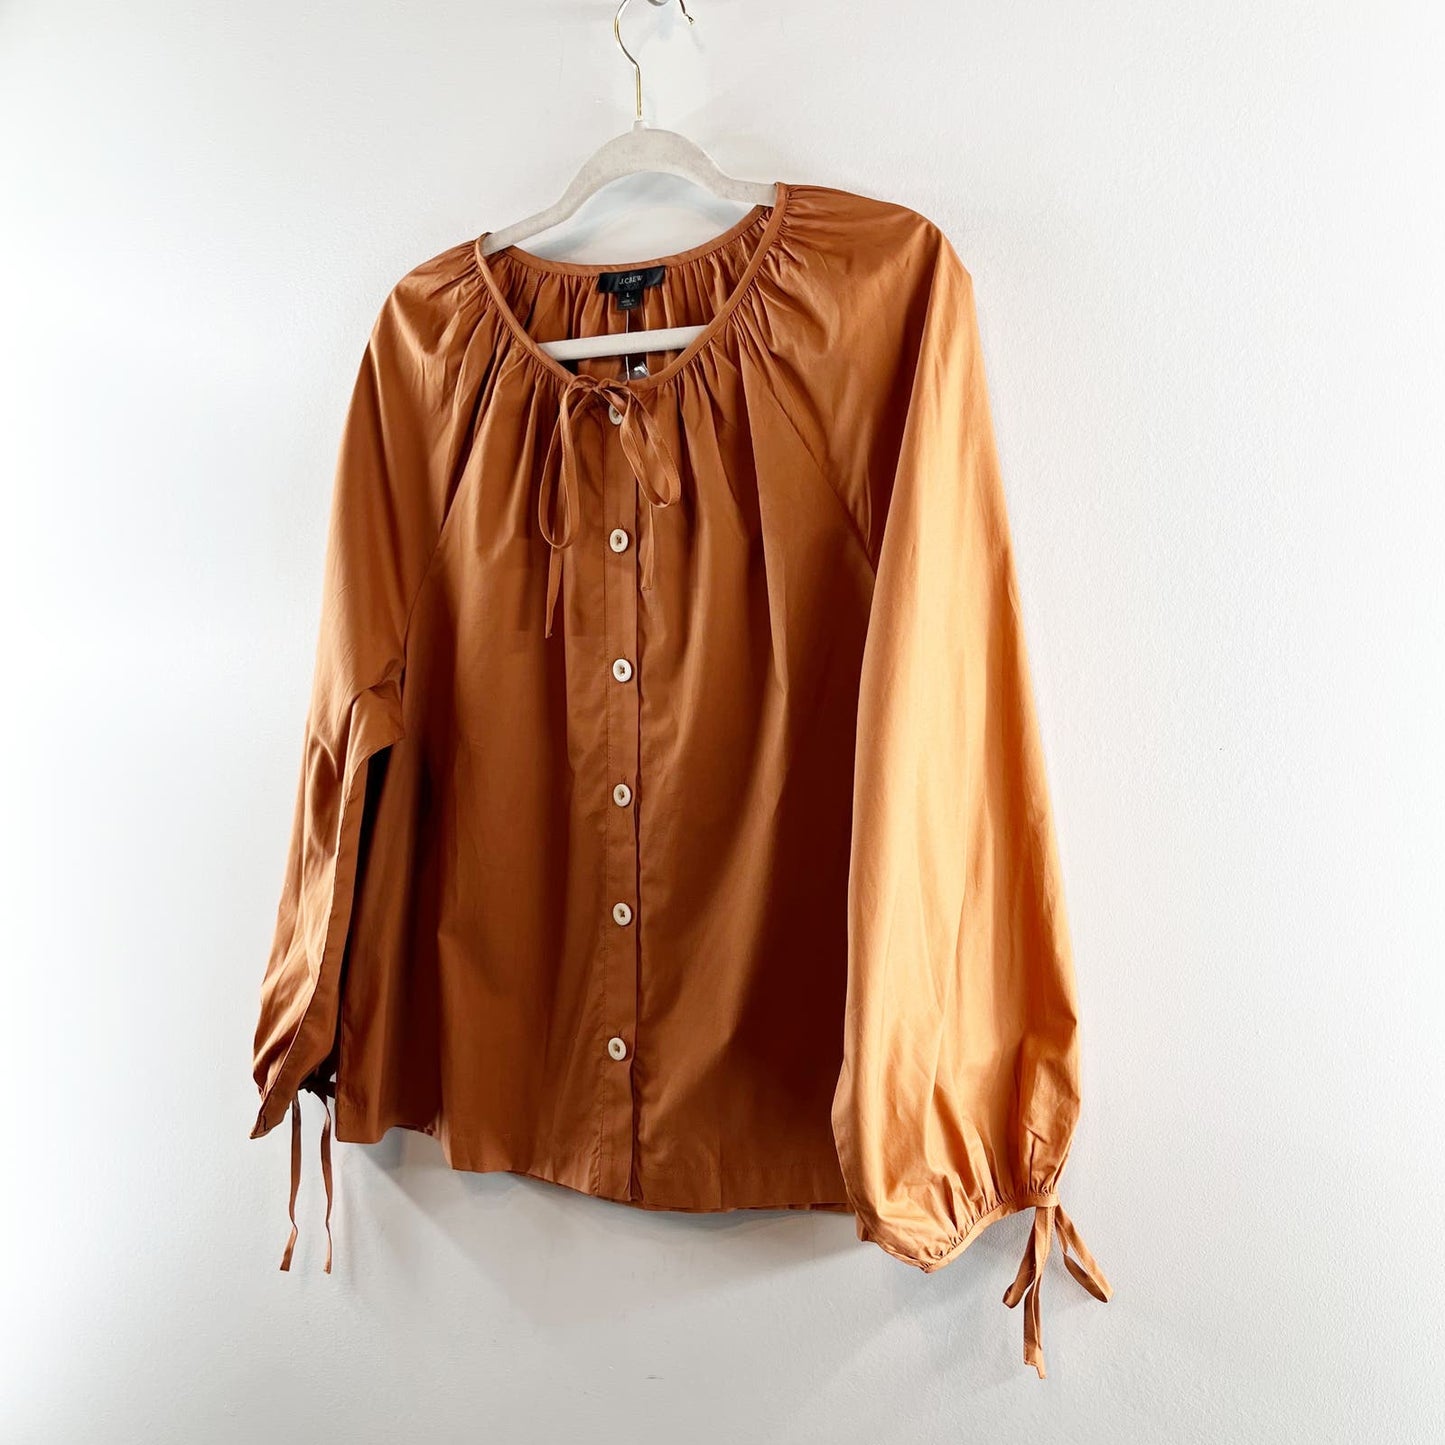 J. Crew Long Tie Sleeve Cotton Button Up Poplin Top Blouse Brown Large